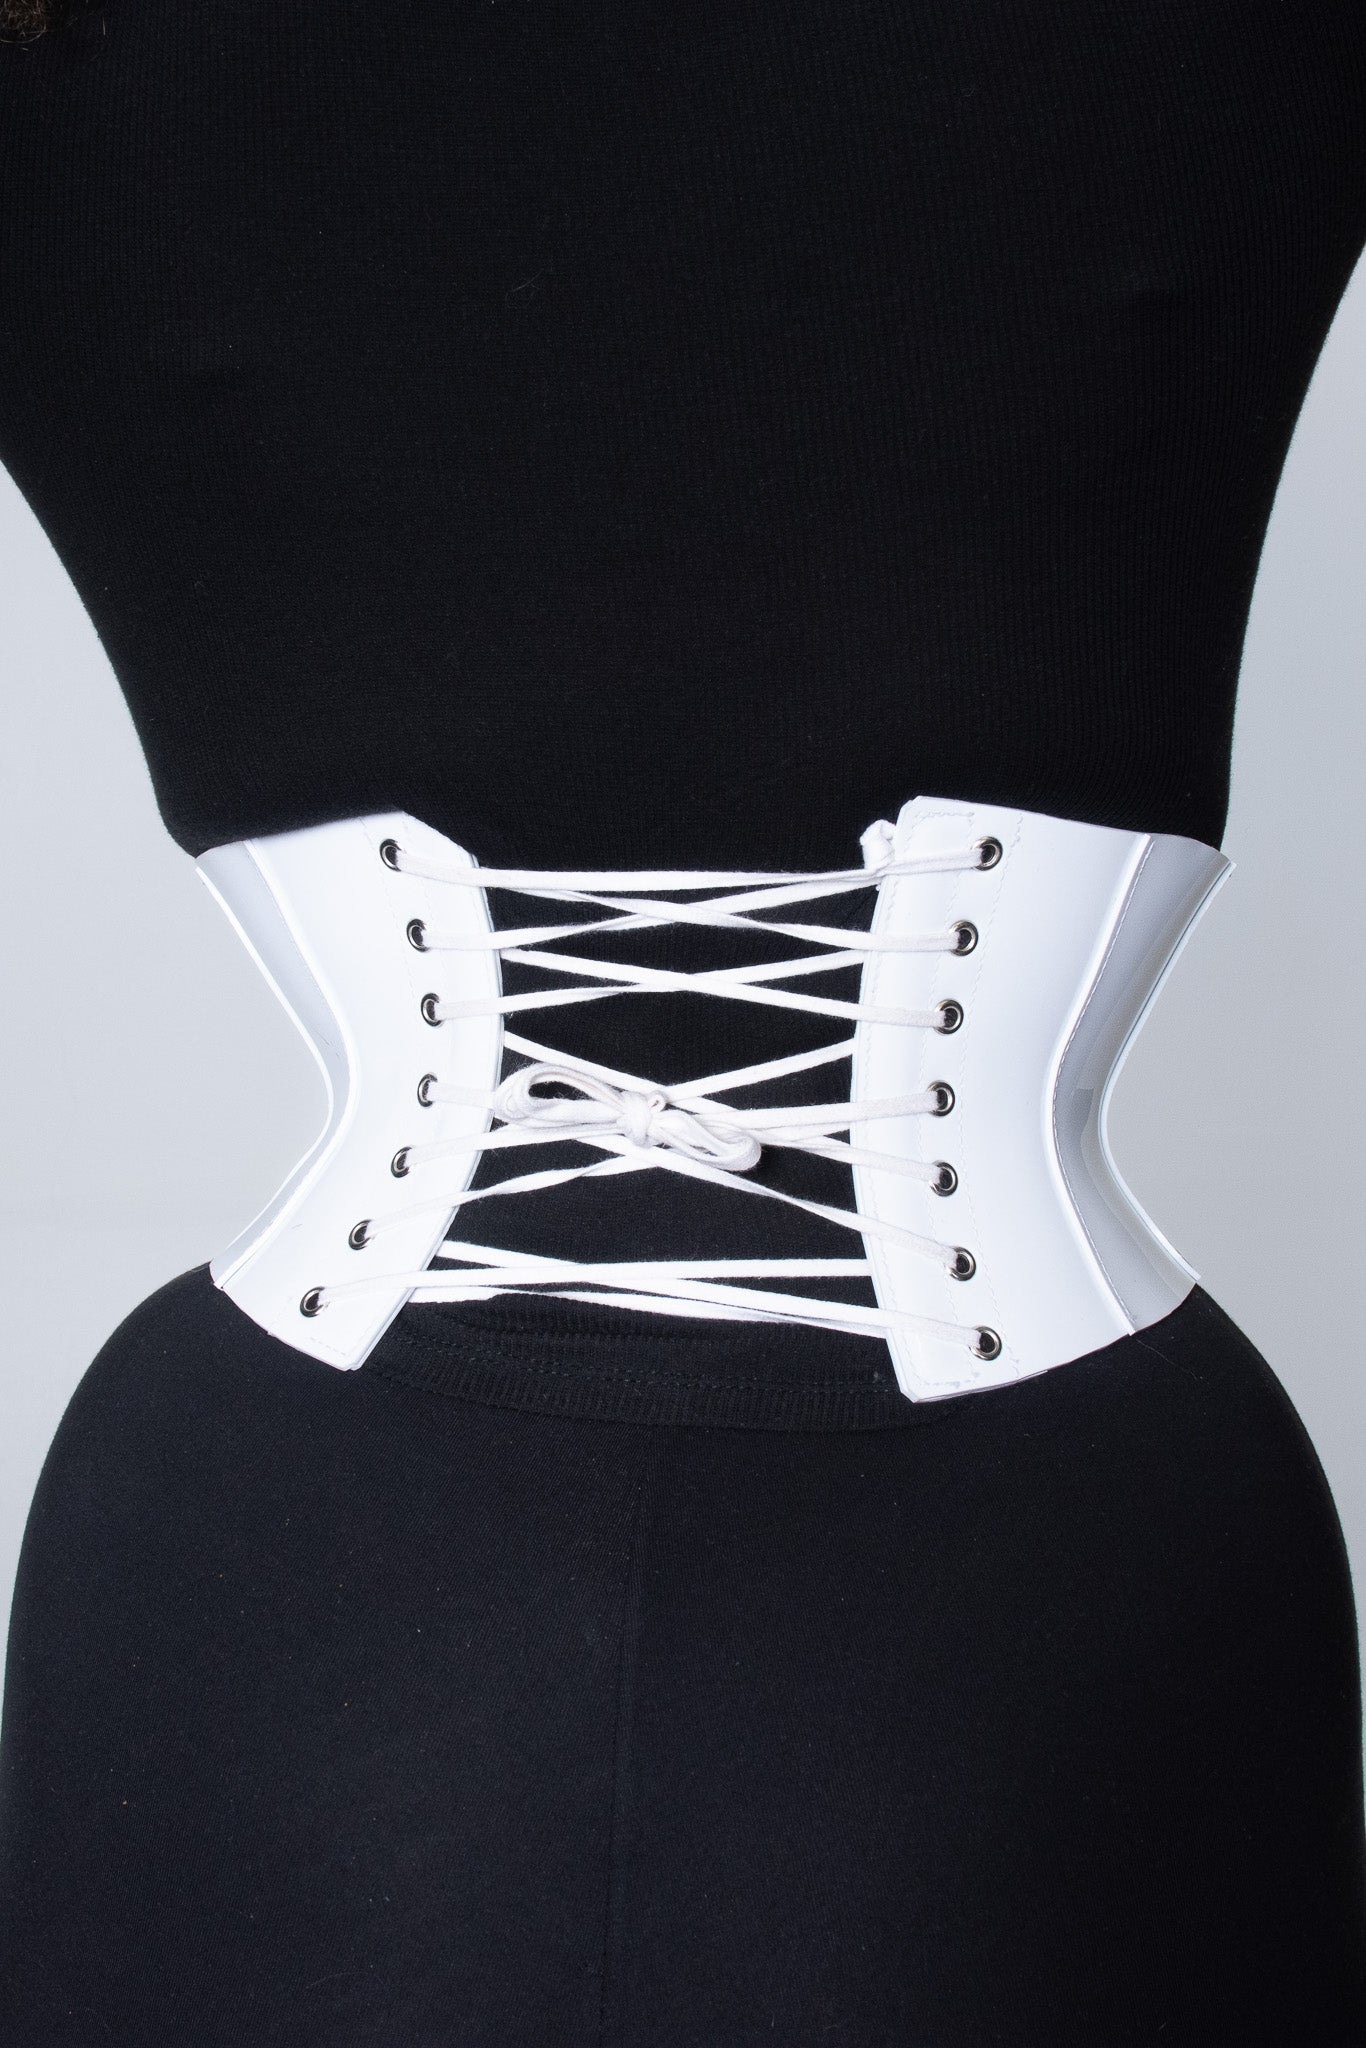 Glamorous shiny white Violetta corset belt adorned with subtle details for a chic look